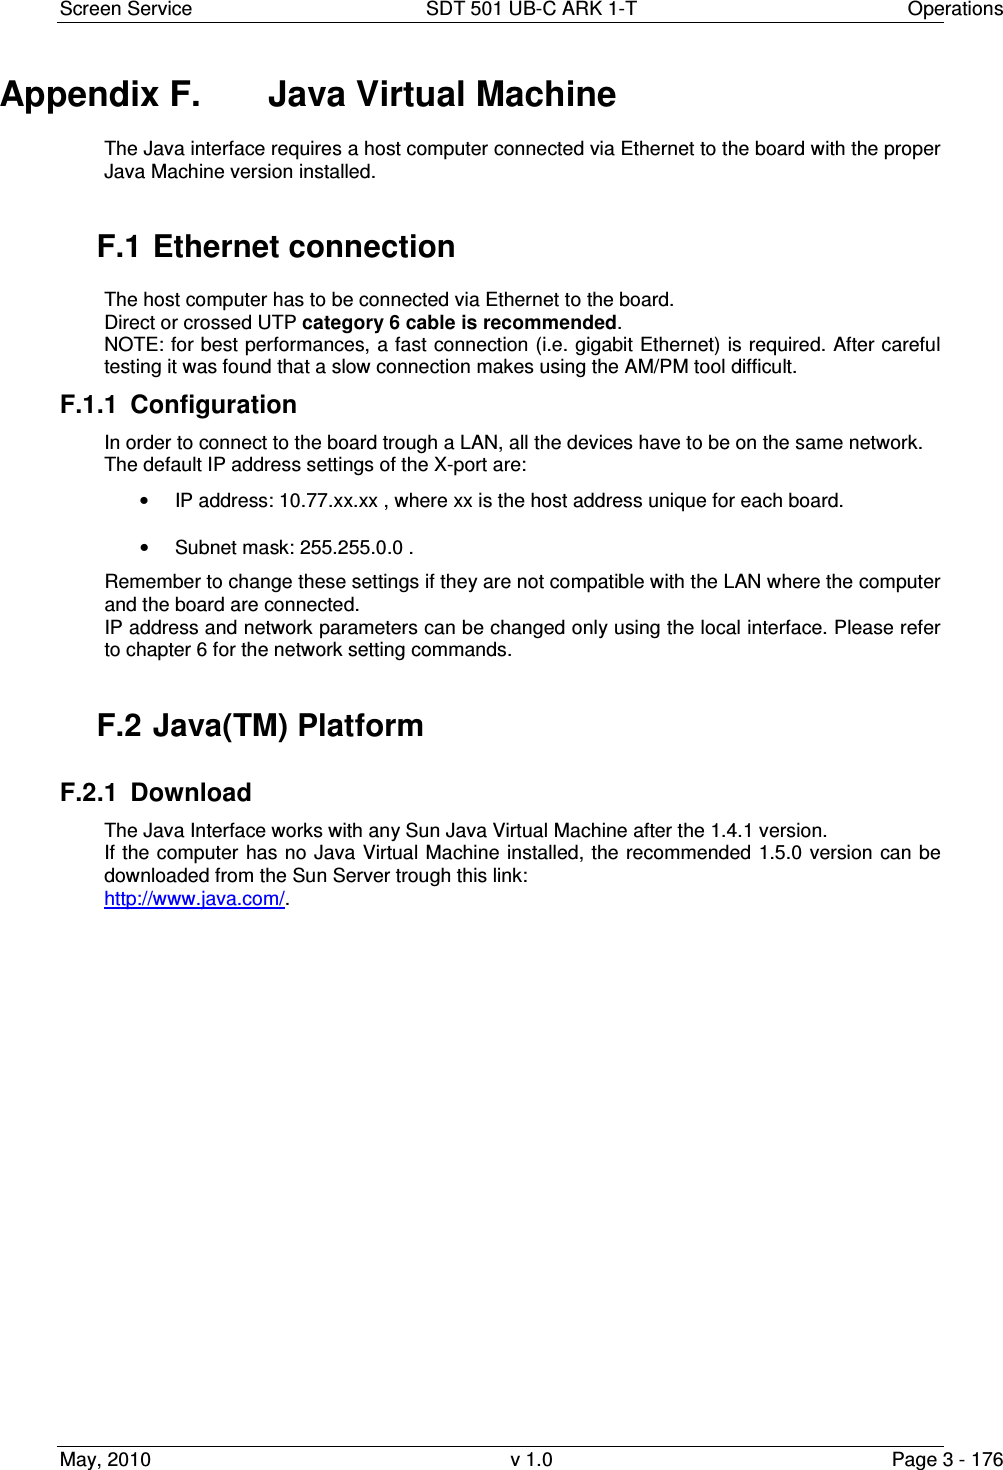 Screen Service  SDT 501 UB-C ARK 1-T  Operations May, 2010  v 1.0  Page 3 - 176 Appendix F.  Java Virtual Machine The Java interface requires a host computer connected via Ethernet to the board with the proper Java Machine version installed.  F.1 Ethernet connection The host computer has to be connected via Ethernet to the board. Direct or crossed UTP category 6 cable is recommended. NOTE: for best performances, a fast connection (i.e. gigabit Ethernet) is required. After careful testing it was found that a slow connection makes using the AM/PM tool difficult. F.1.1  Configuration In order to connect to the board trough a LAN, all the devices have to be on the same network.  The default IP address settings of the X-port are: •  IP address: 10.77.xx.xx , where xx is the host address unique for each board. •  Subnet mask: 255.255.0.0 . Remember to change these settings if they are not compatible with the LAN where the computer and the board are connected. IP address and network parameters can be changed only using the local interface. Please refer to chapter 6 for the network setting commands.  F.2 Java(TM) Platform F.2.1  Download  The Java Interface works with any Sun Java Virtual Machine after the 1.4.1 version. If the computer has no Java Virtual Machine  installed, the recommended  1.5.0 version can be downloaded from the Sun Server trough this link:  http://www.java.com/.                       